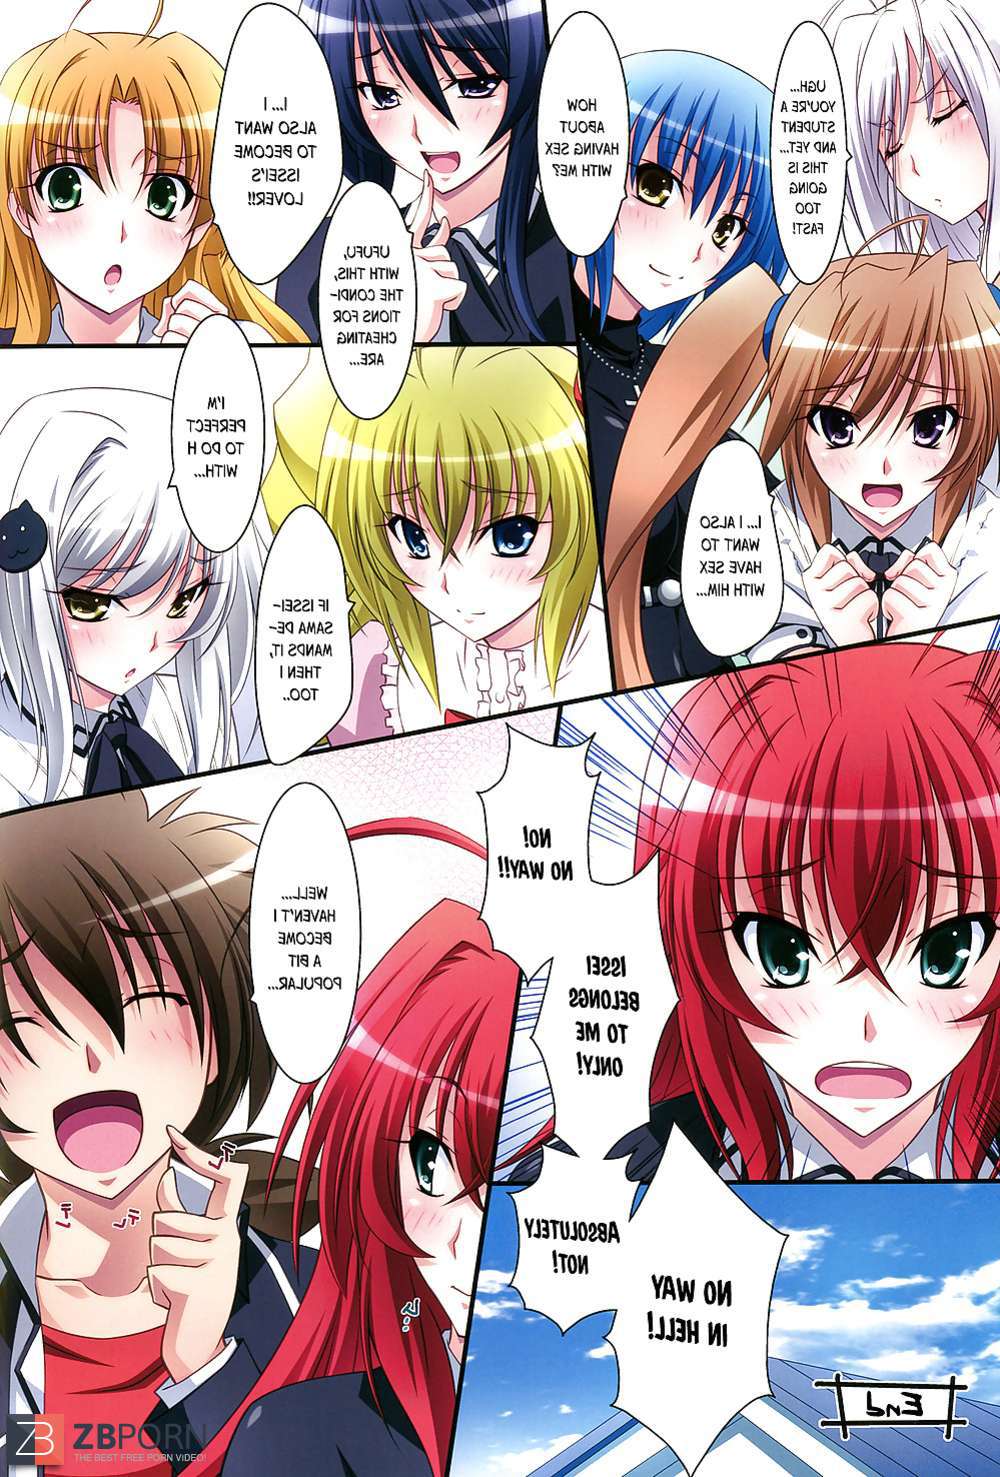 best of School rias gremory dxd high